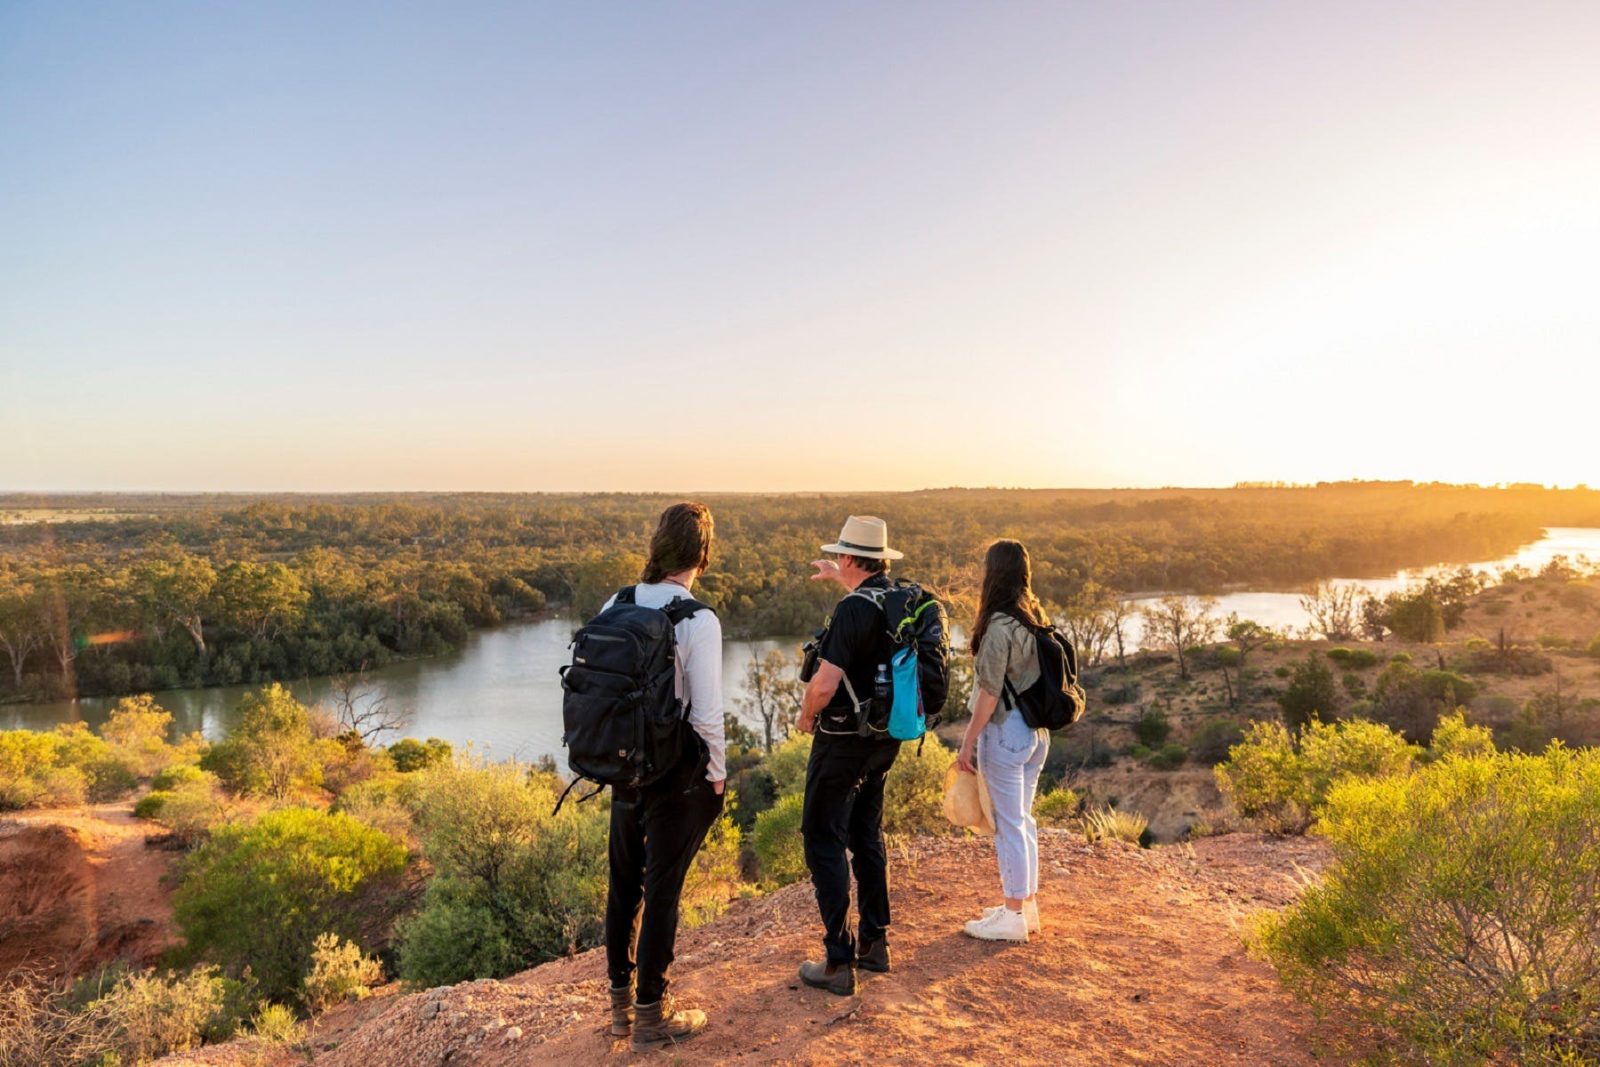 Local guides share the stories of the Murray River